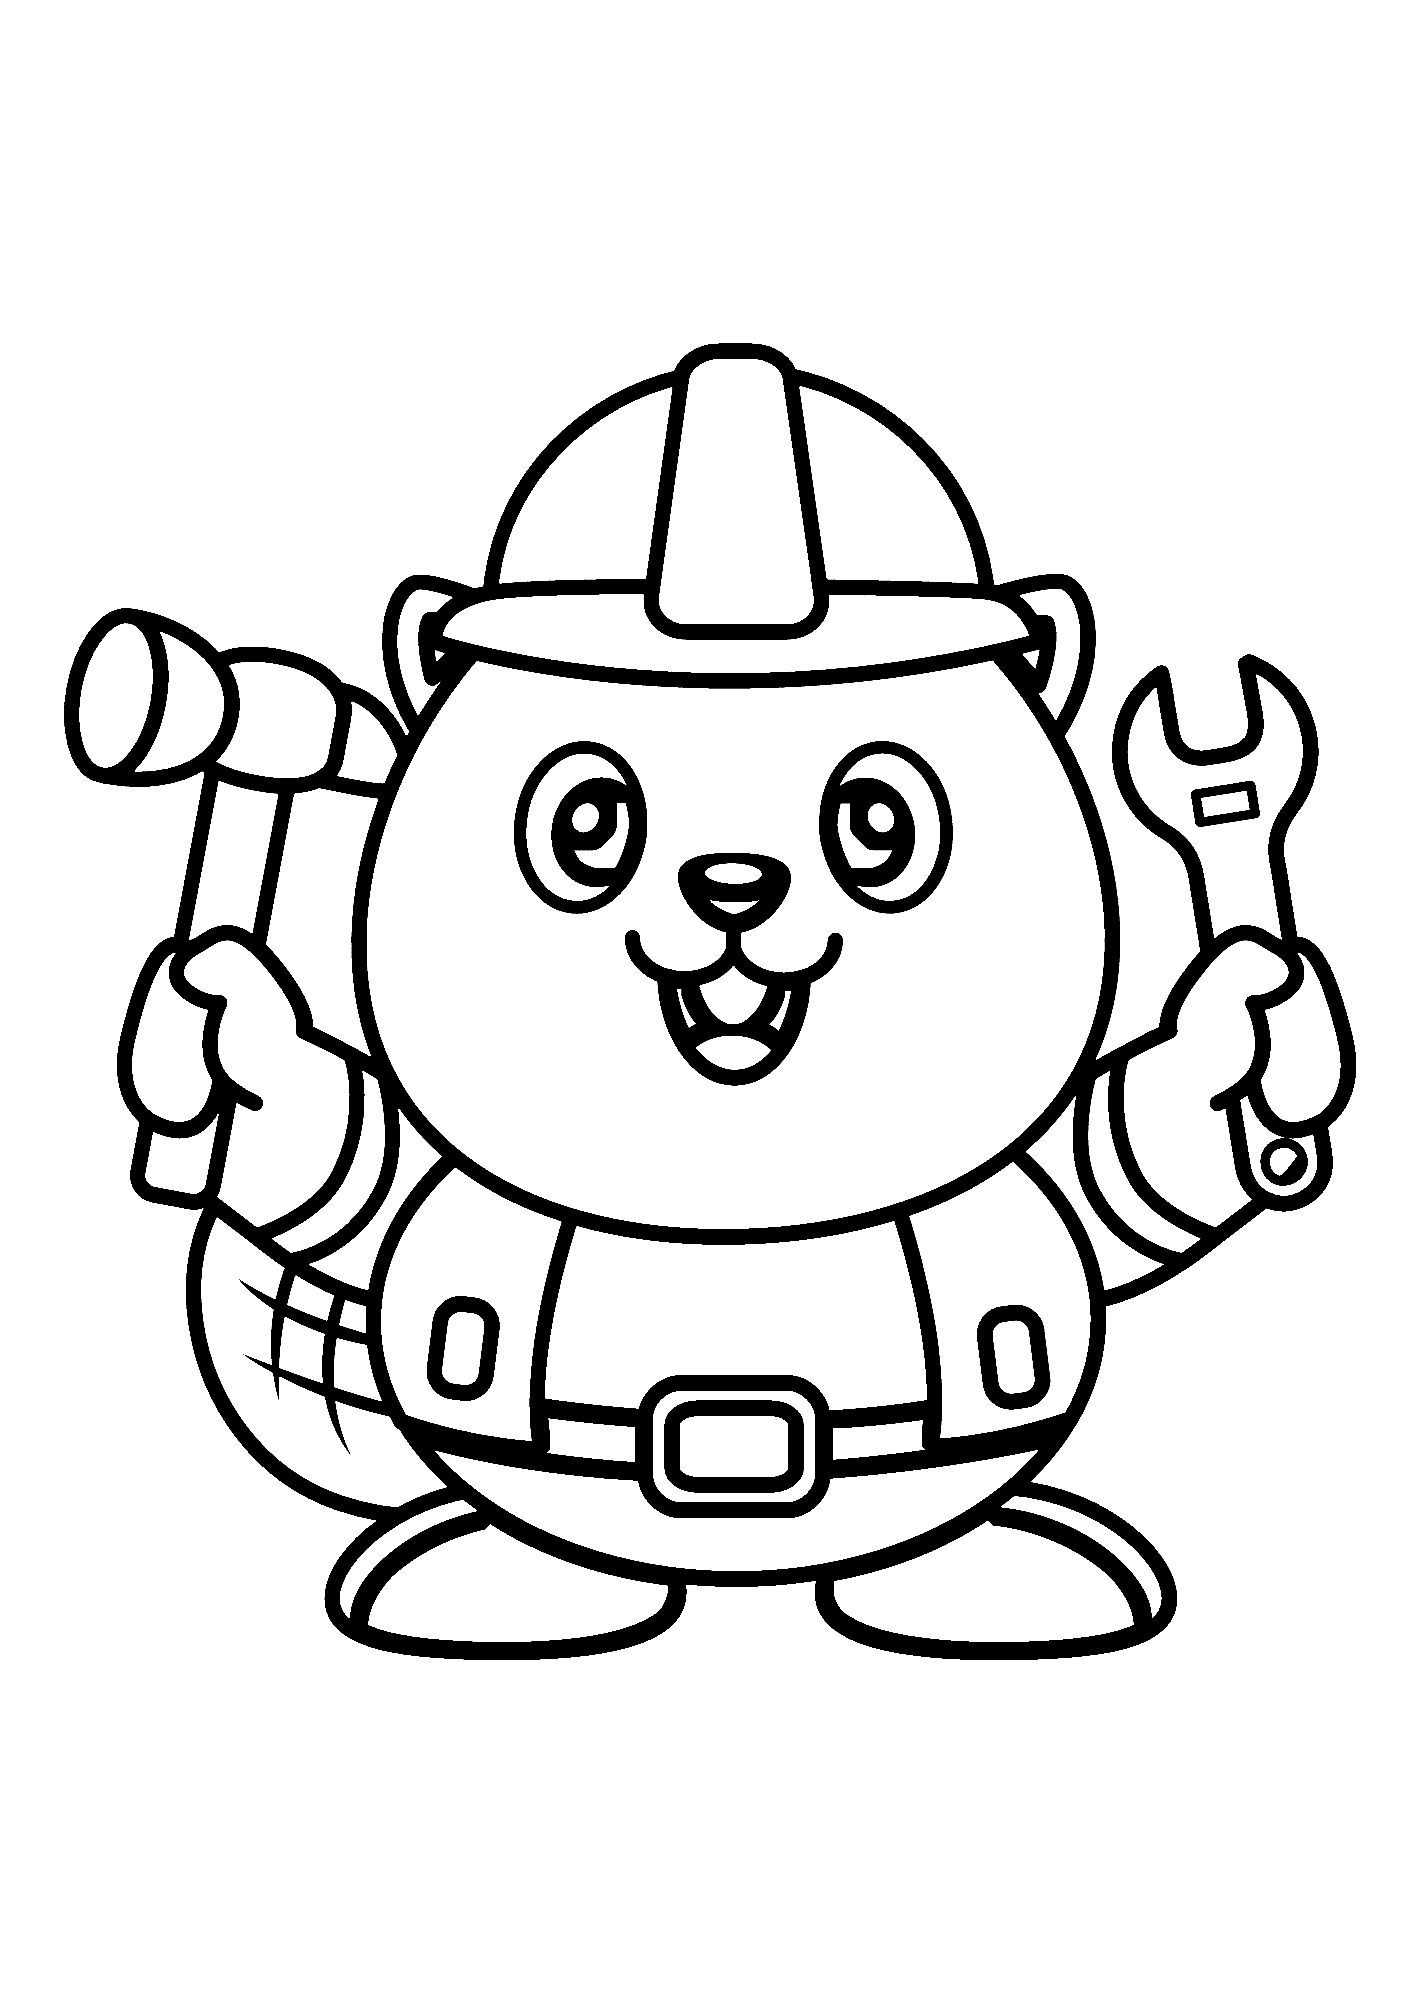 Beaver Worker Coloring Page